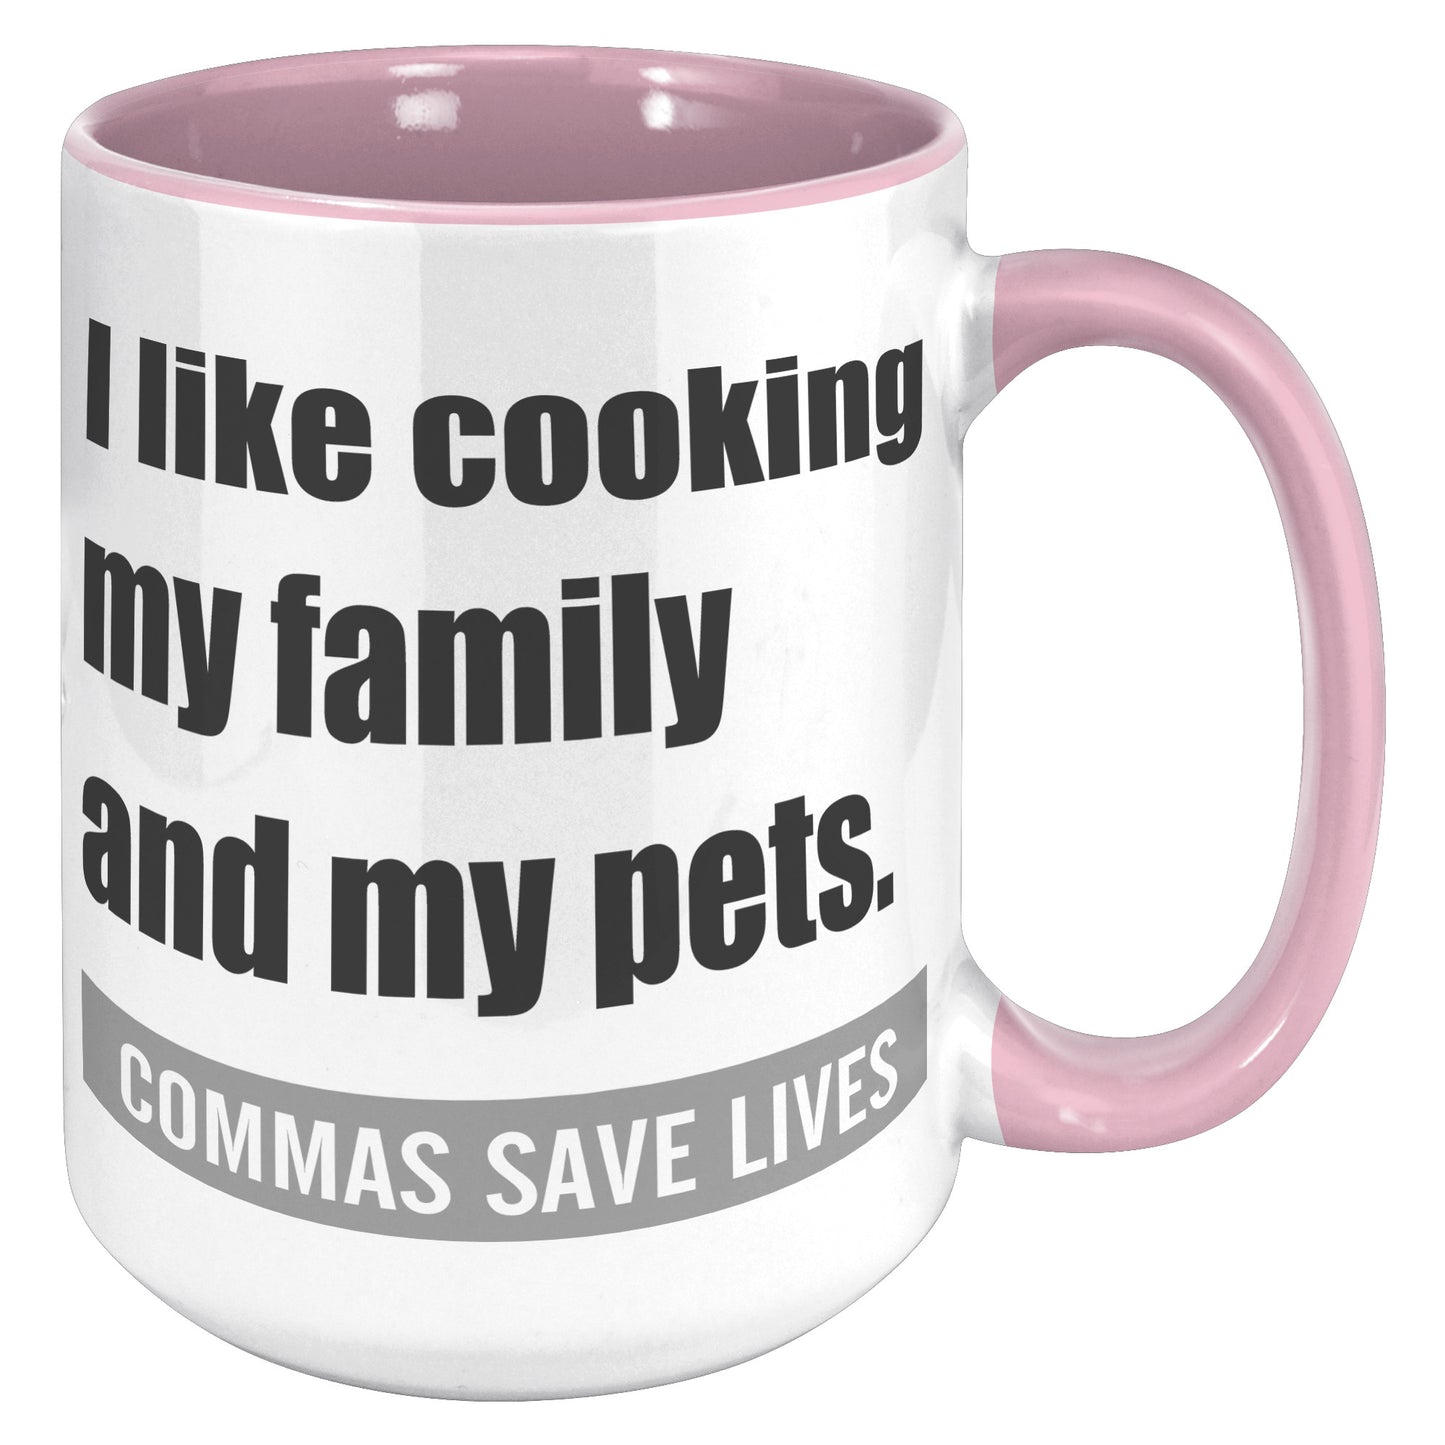 I Like Cooking My Family And My Pets. Commas Save Lives | Accent Mug